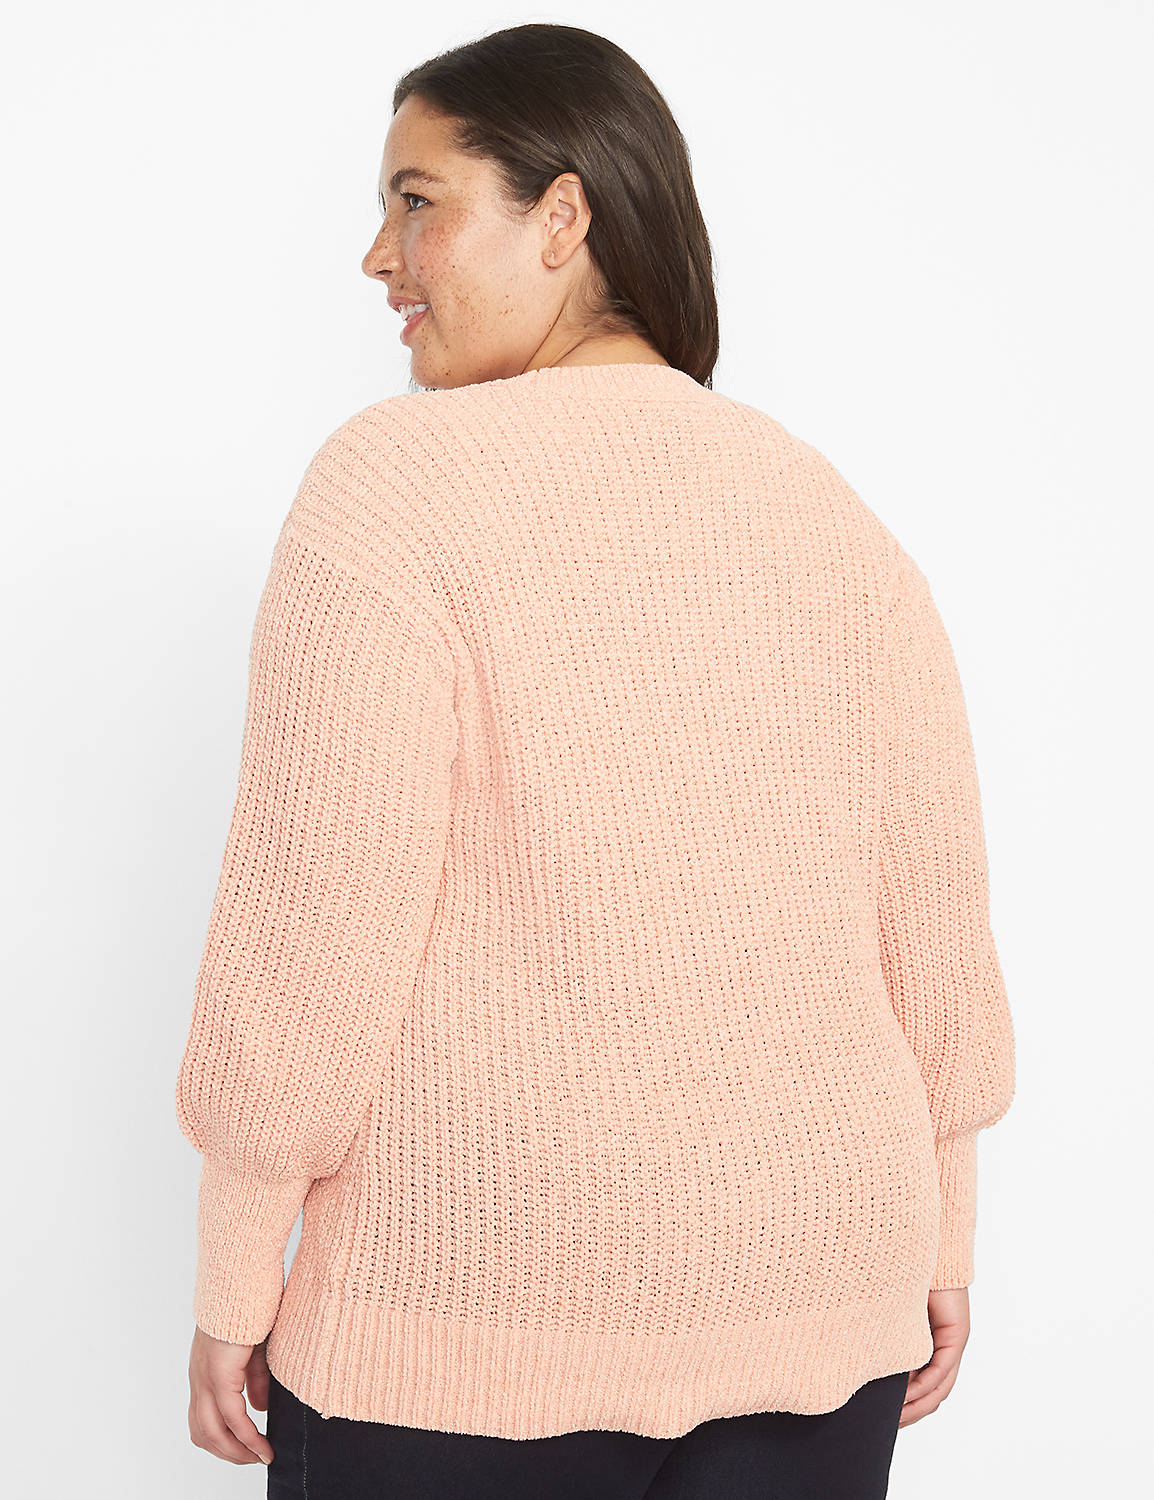 Long Sleeve Crew Neck Pullover 1124685:PANTONE Coral Pink:26/28 Product Image 2